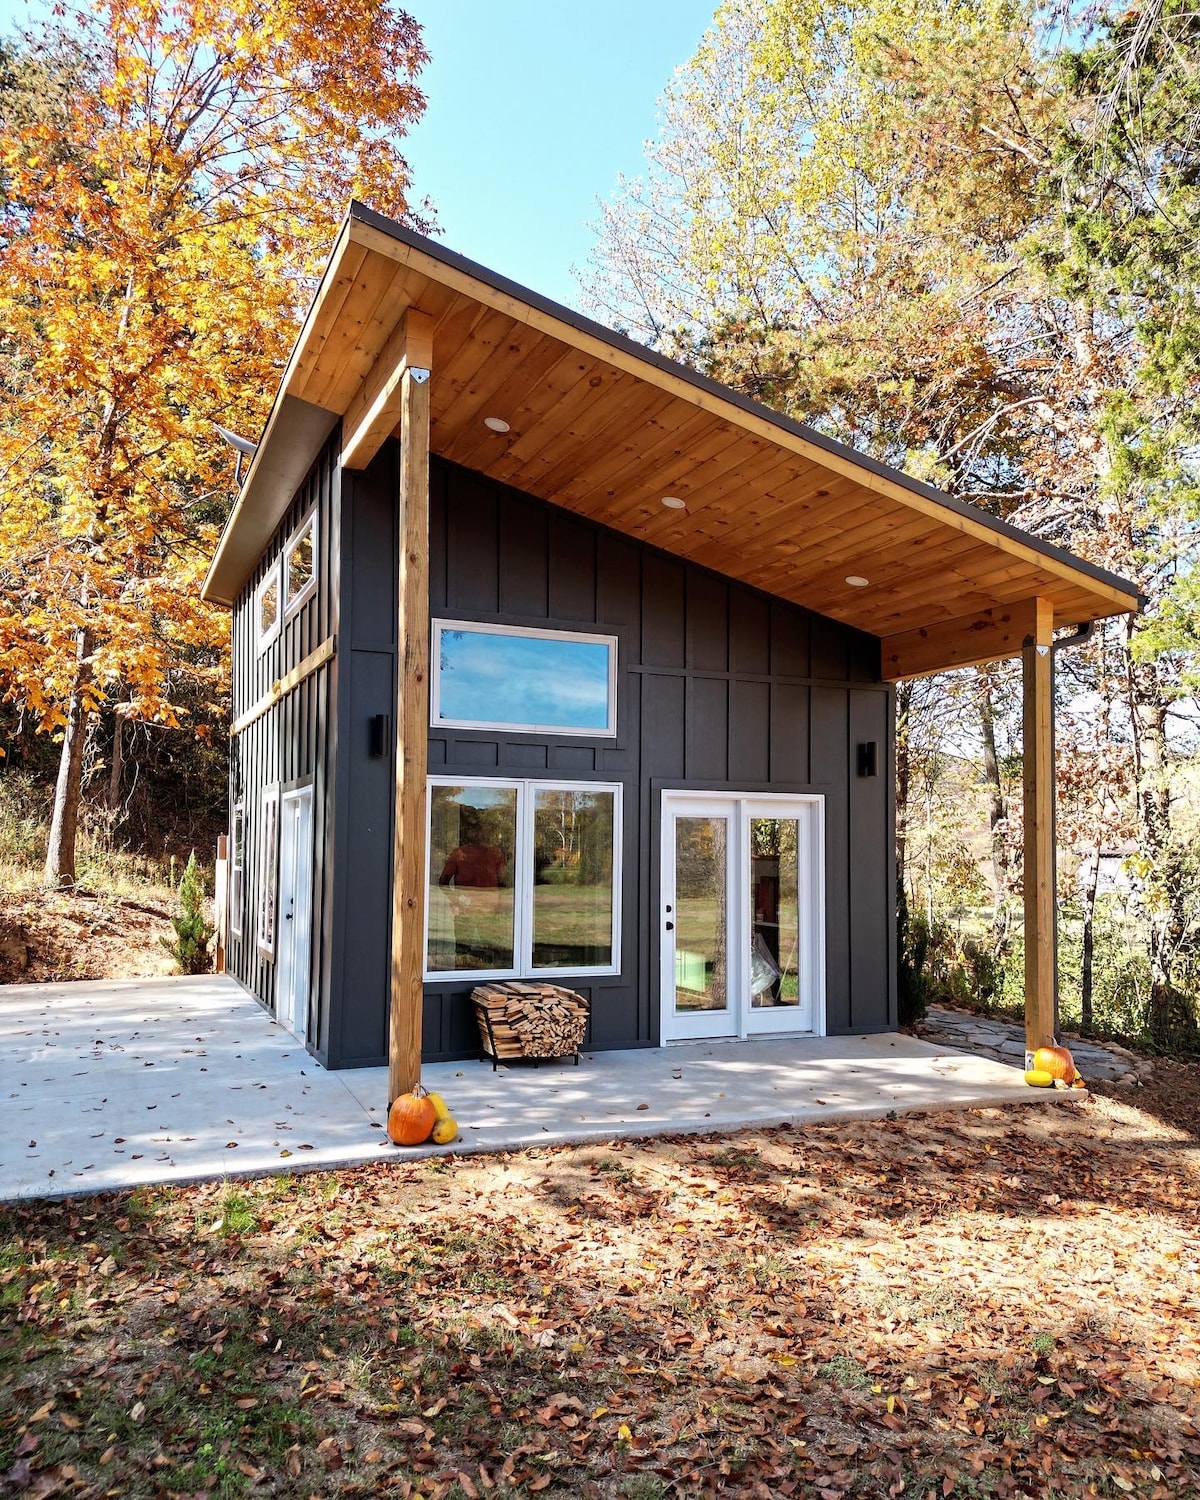 OFF-GRID•New•Modern•
Tiny Home•On Lake•20 acres